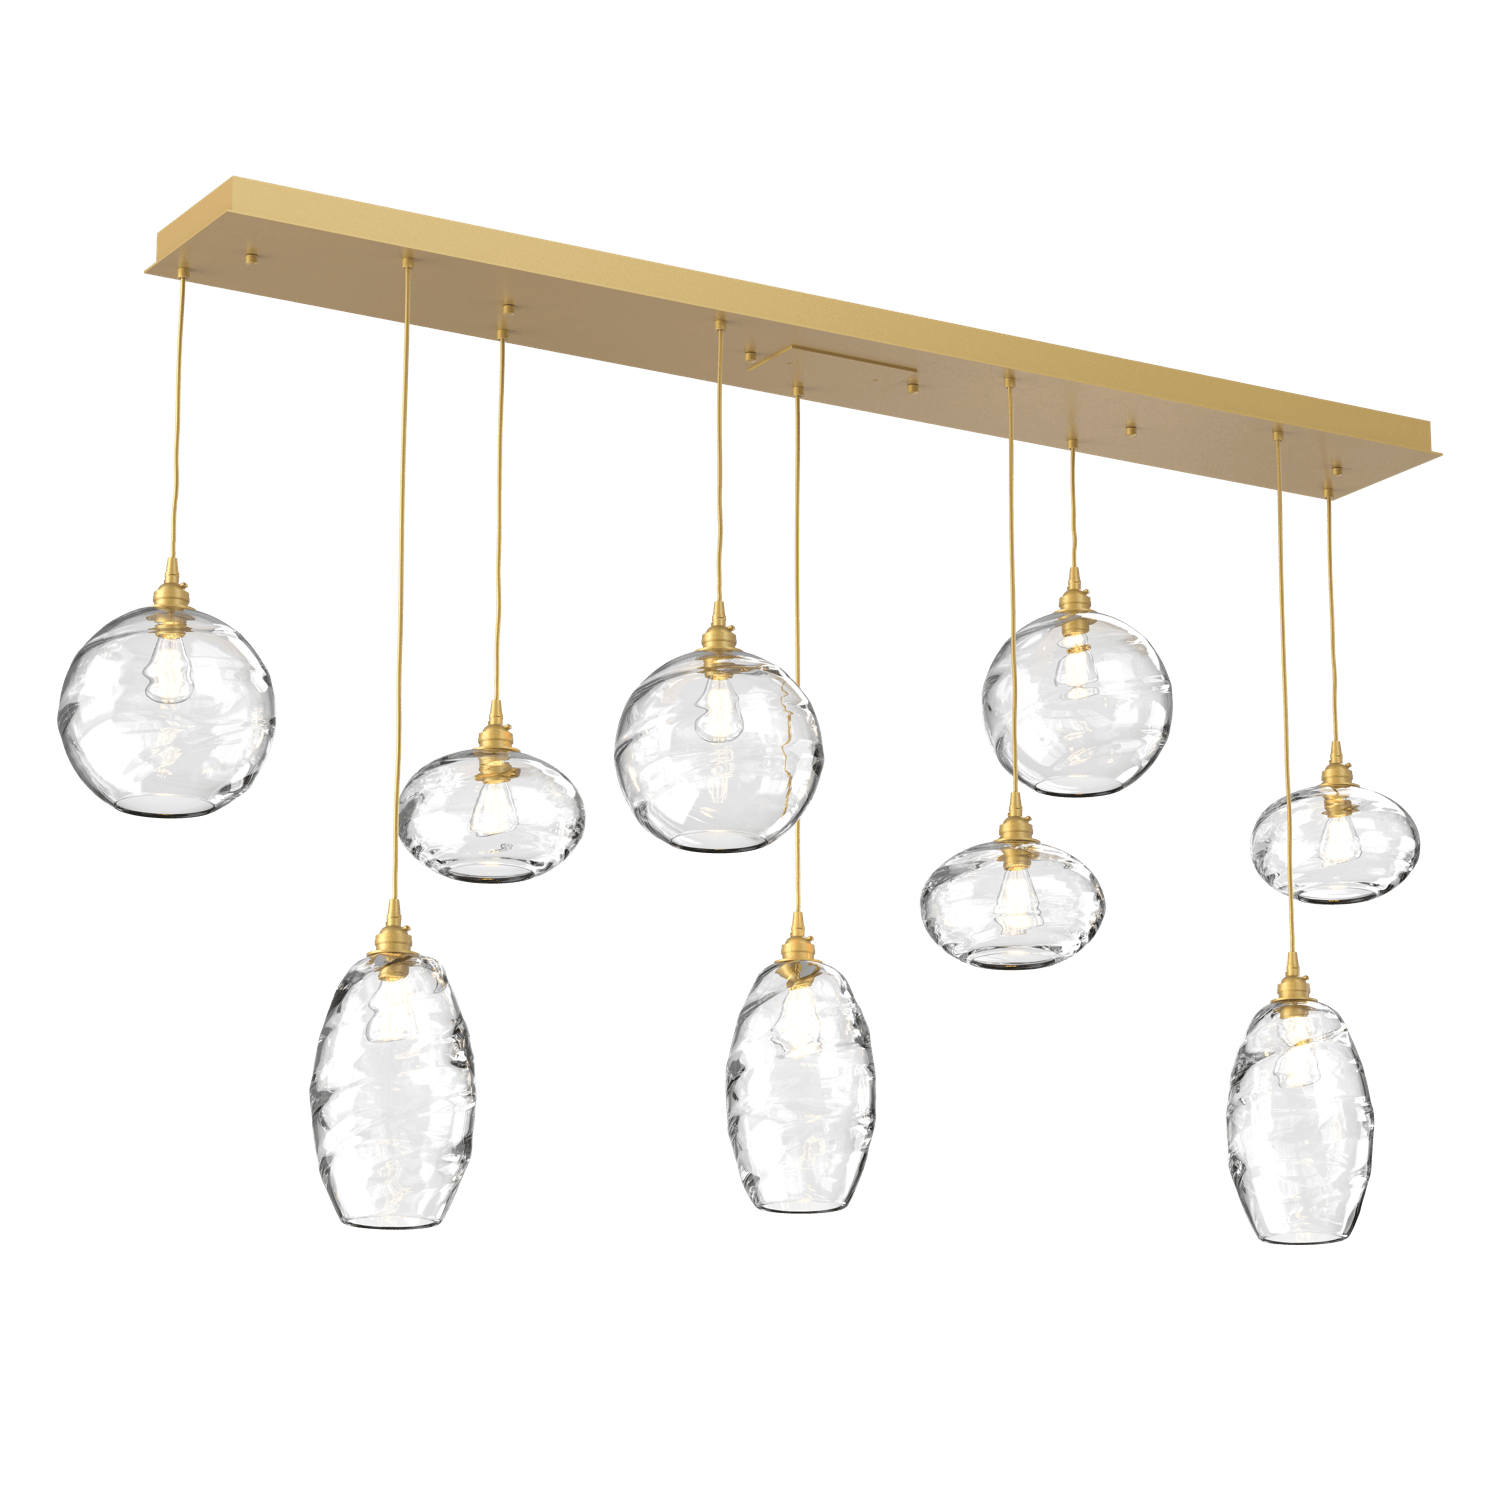 PLB0048-09-GB-OC-Hammerton-Studio-Optic-Blown-Glass-Misto-9-light-linear-pendant-chandelier-with-gilded-brass-finish-and-optic-clear-blown-glass-shades-and-incandescent-lamping